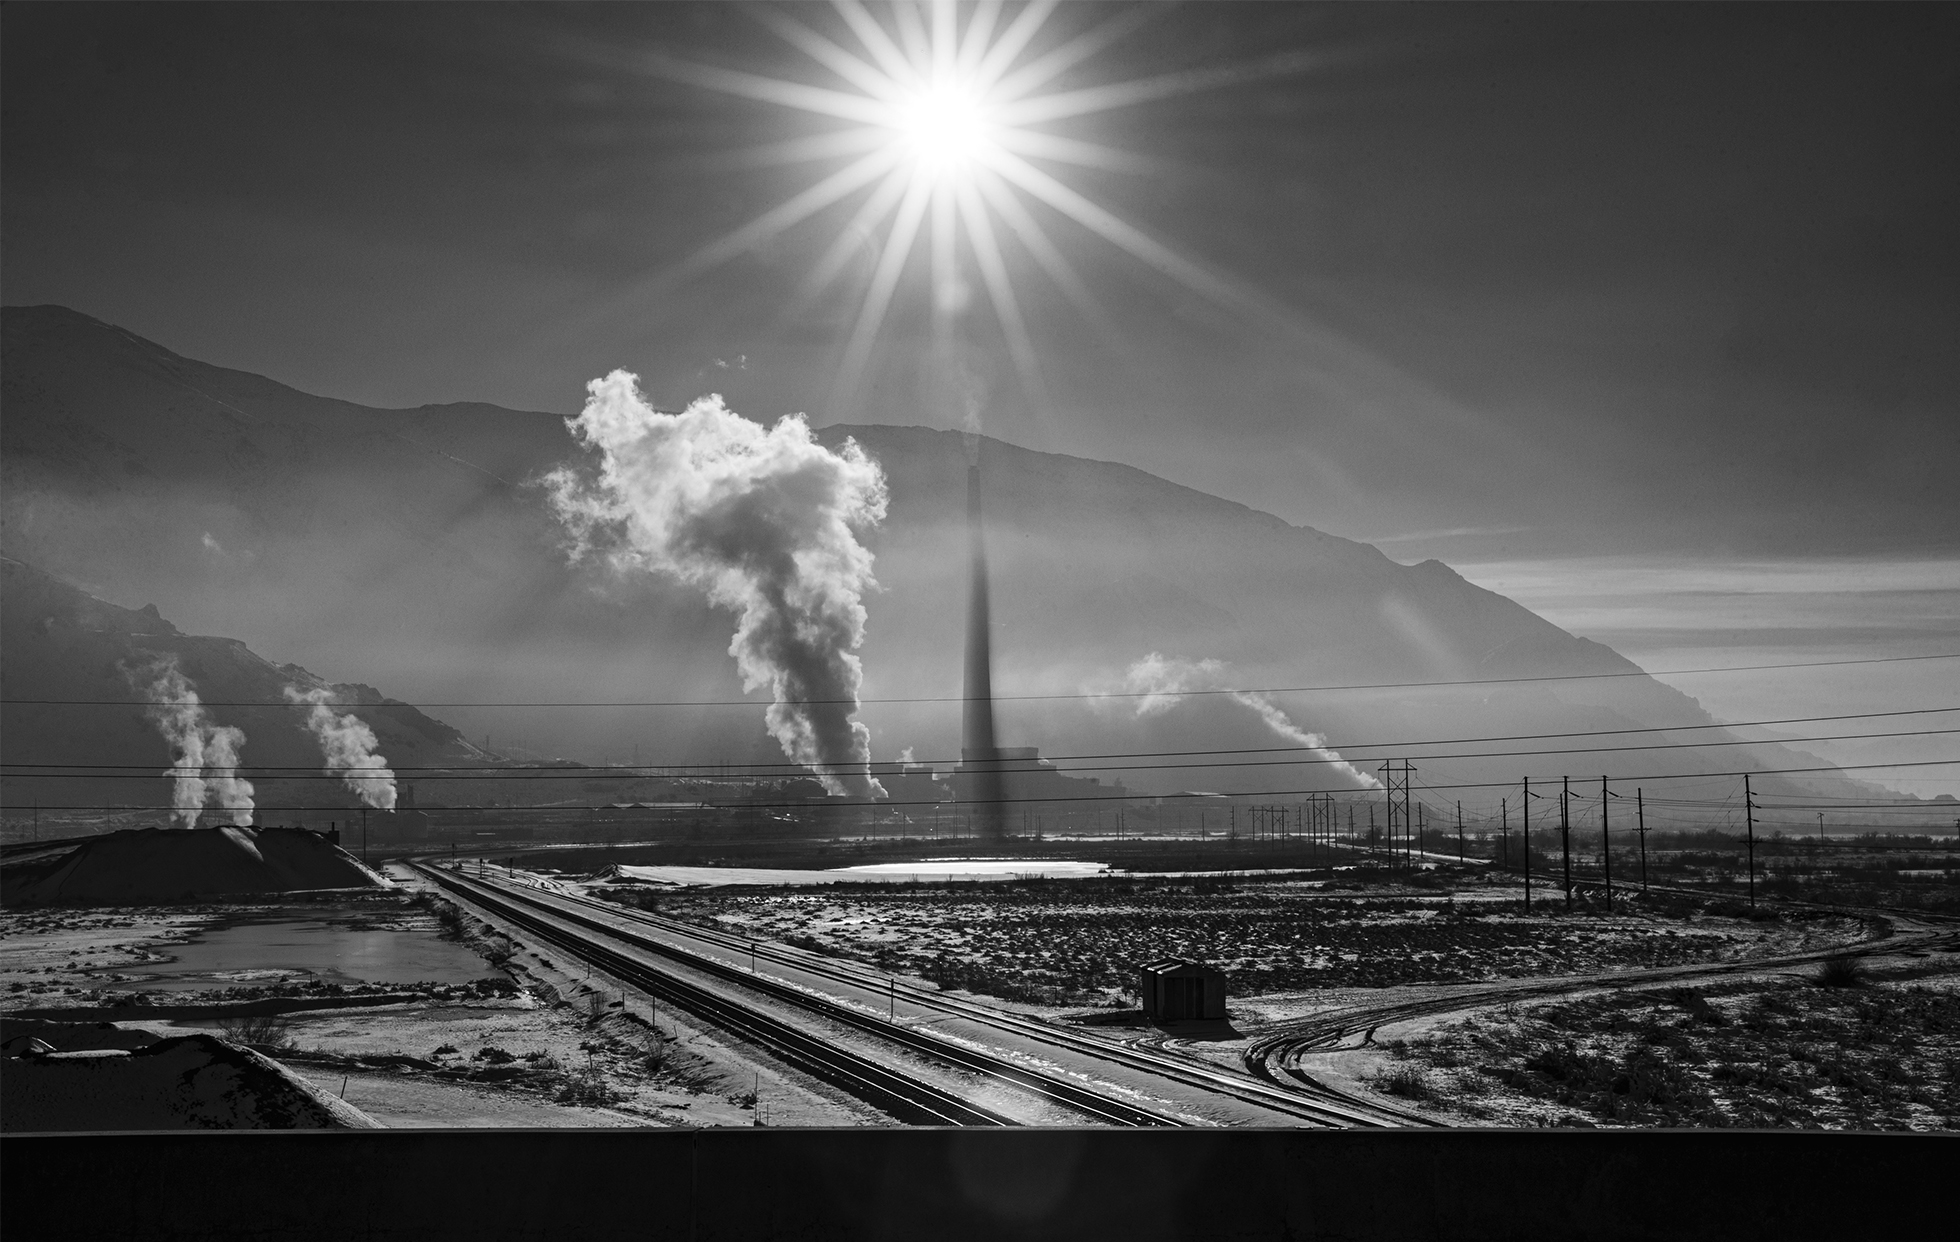 A wide shot of a desolate industrial landscape with smoke billowing from several smokestacks. There is a sunburst at the top middle of the image that is dulled by the pollution in the air.